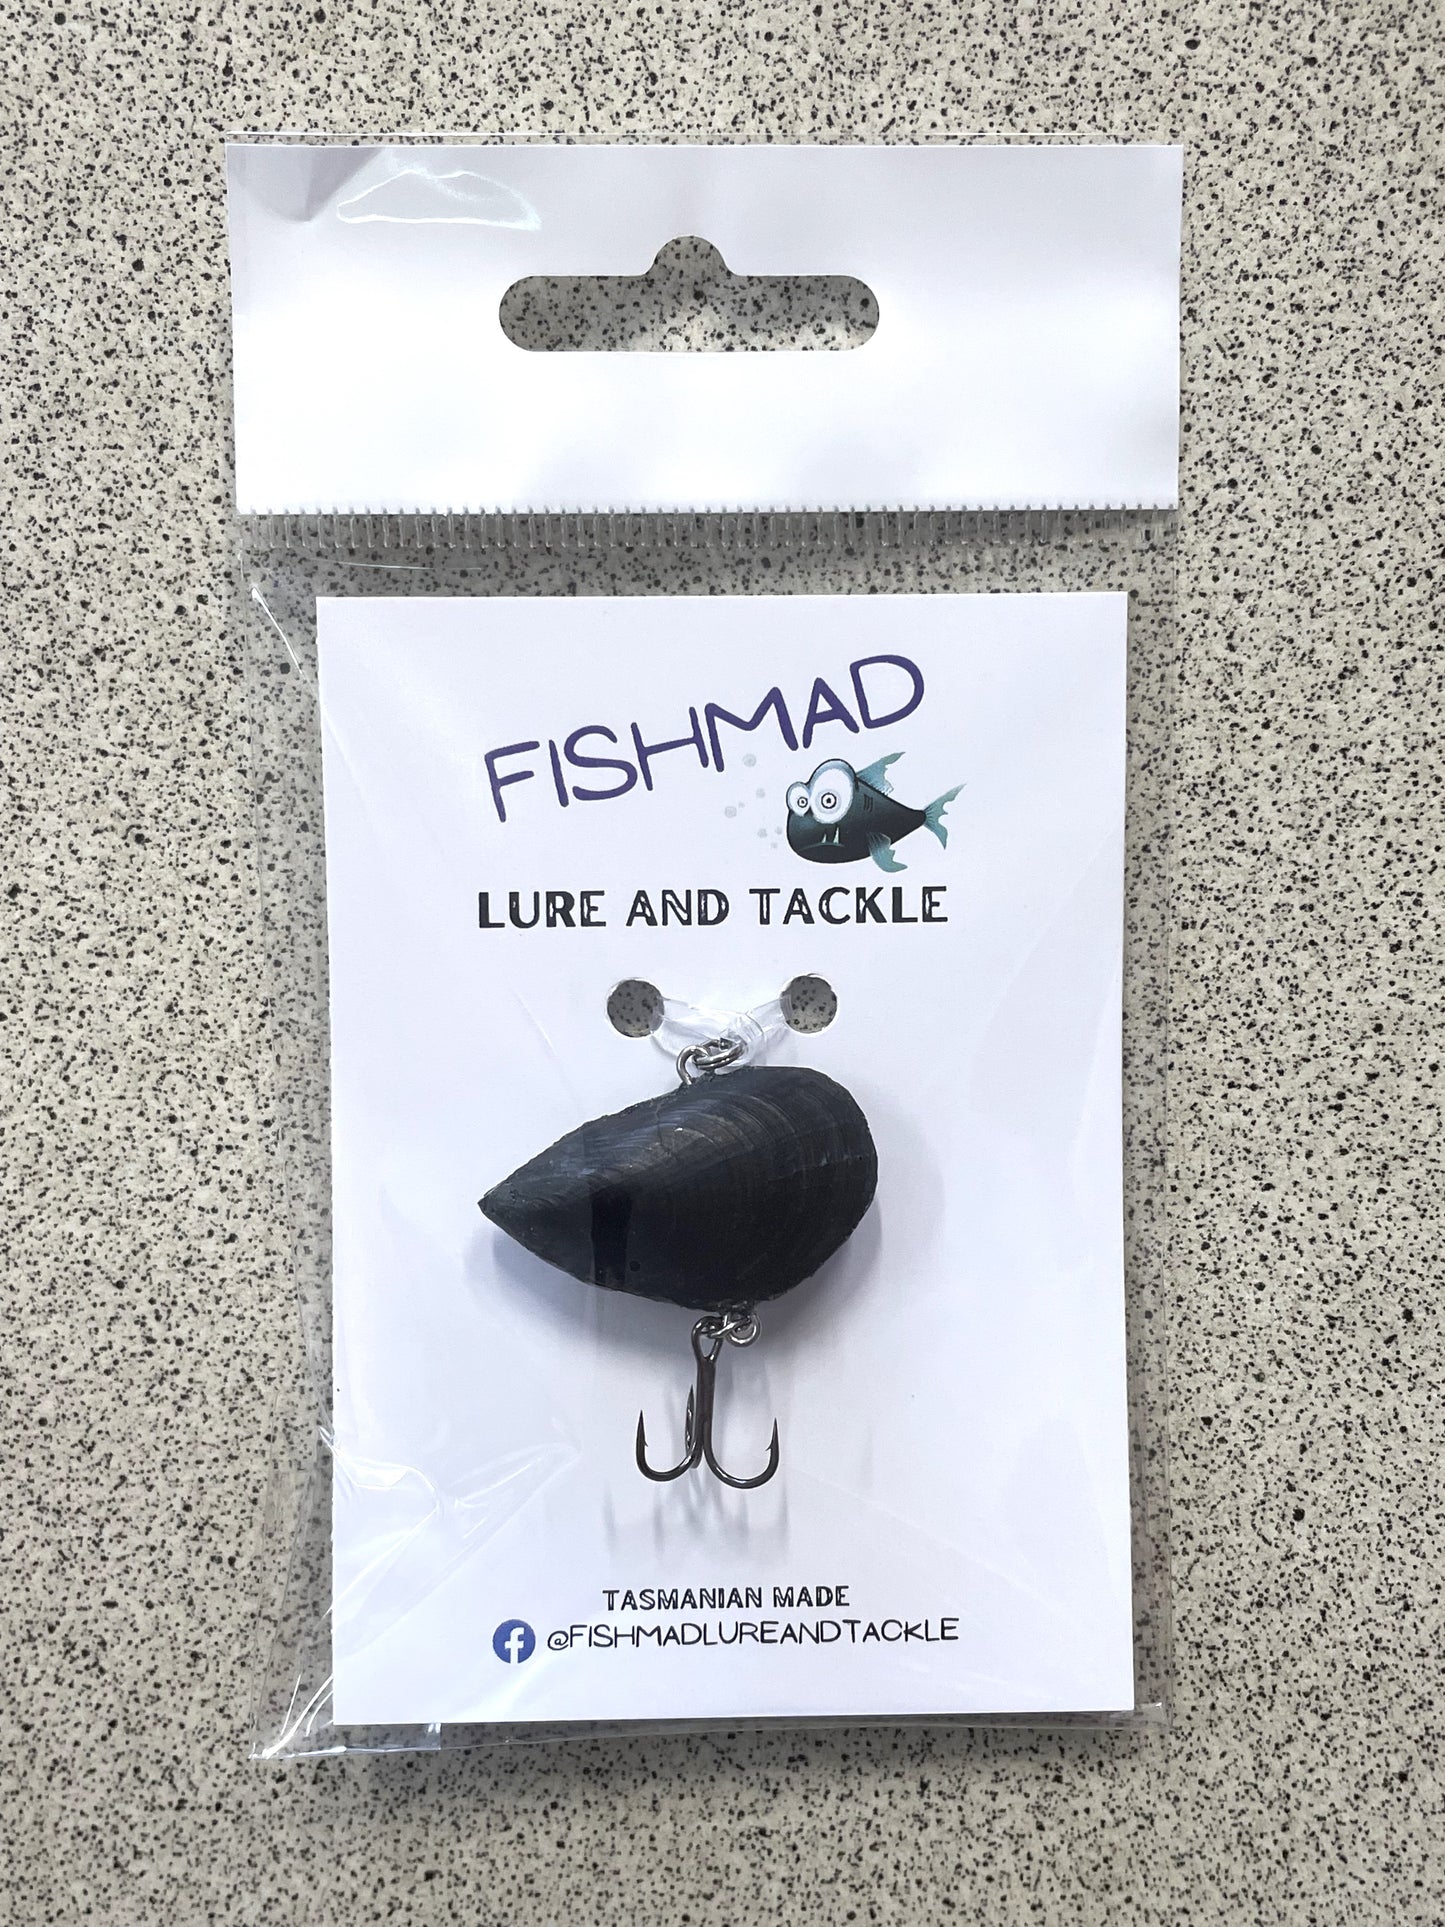 Fishmad Mussel Lure - Natural Black - Small